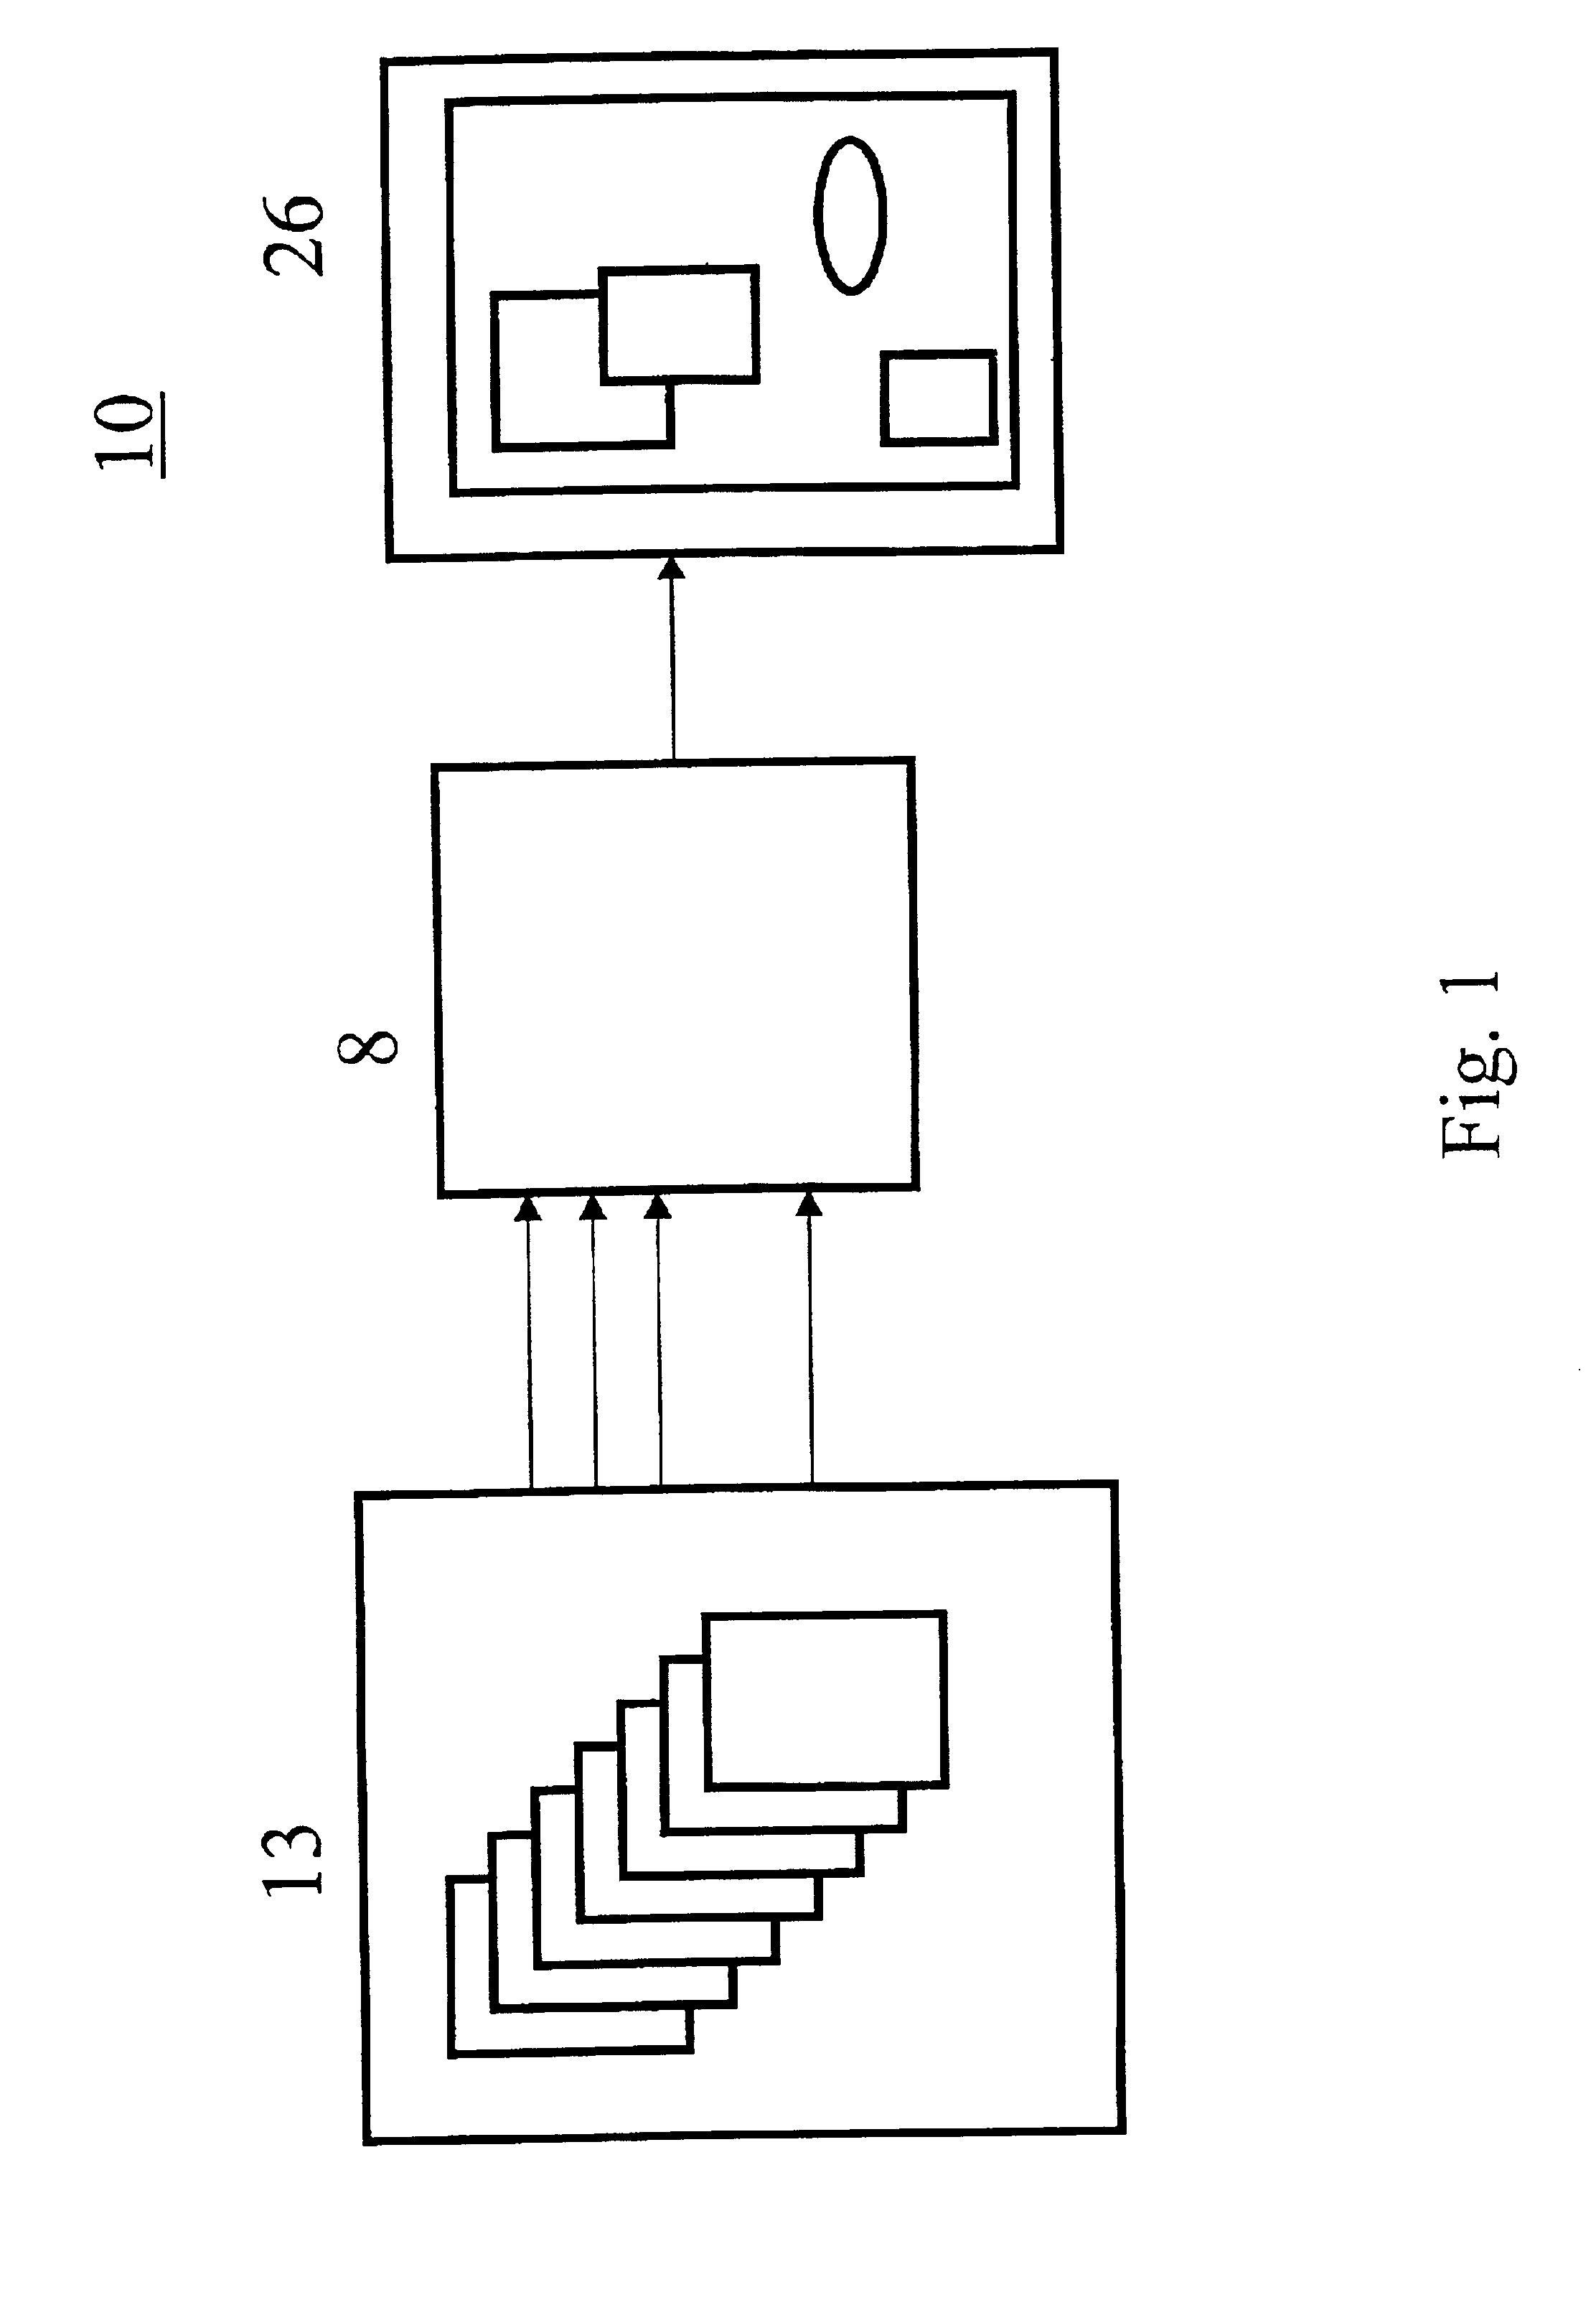 Systems and methods for digital document processing